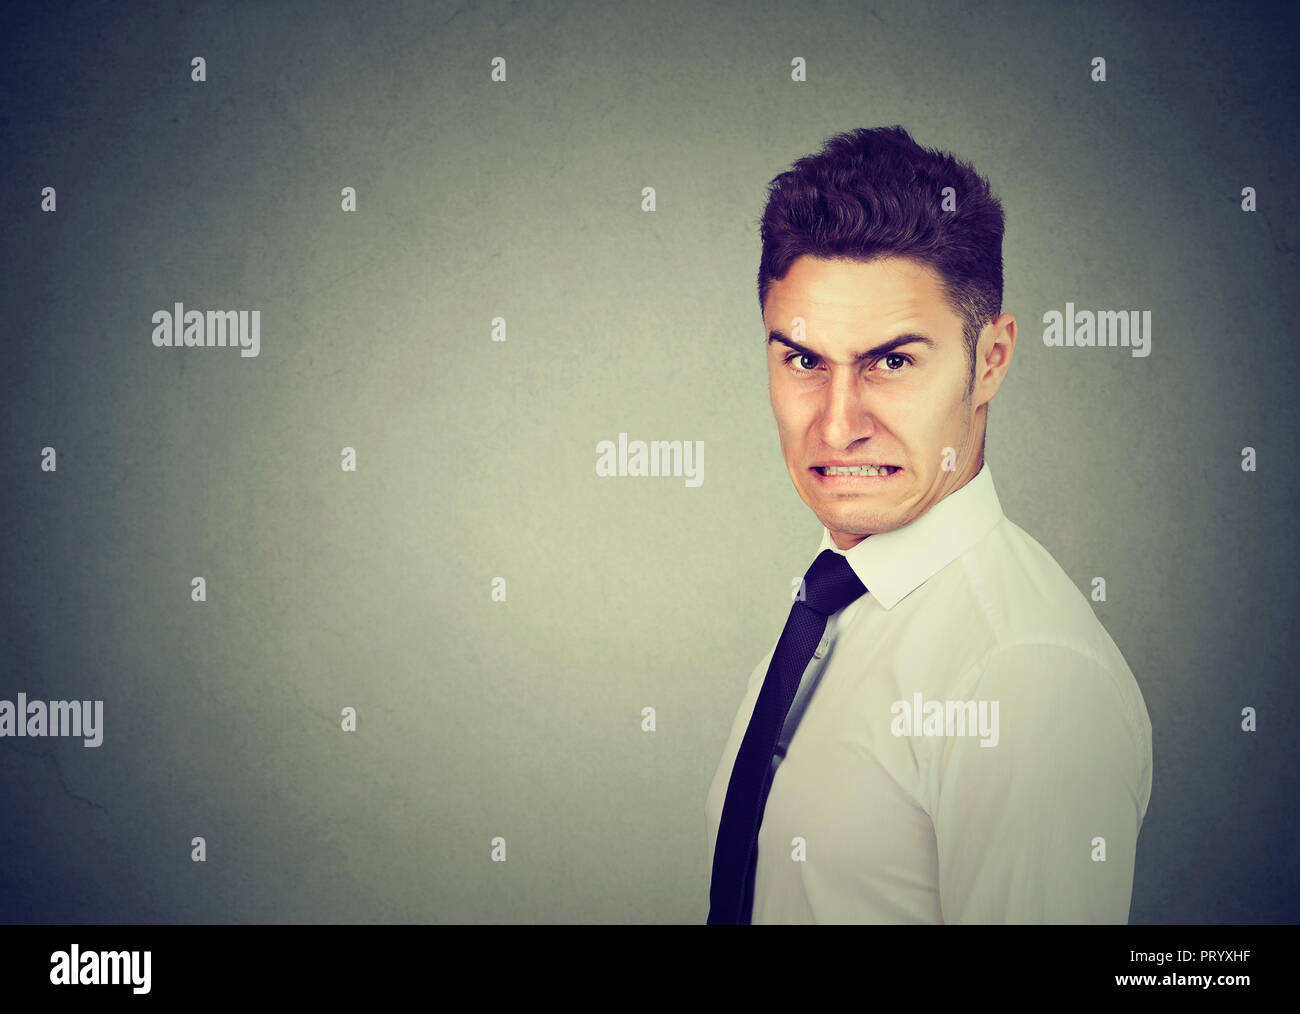 Formal man in shirt with displeased grimace looking grumpy at camera on gray background Stock Photo